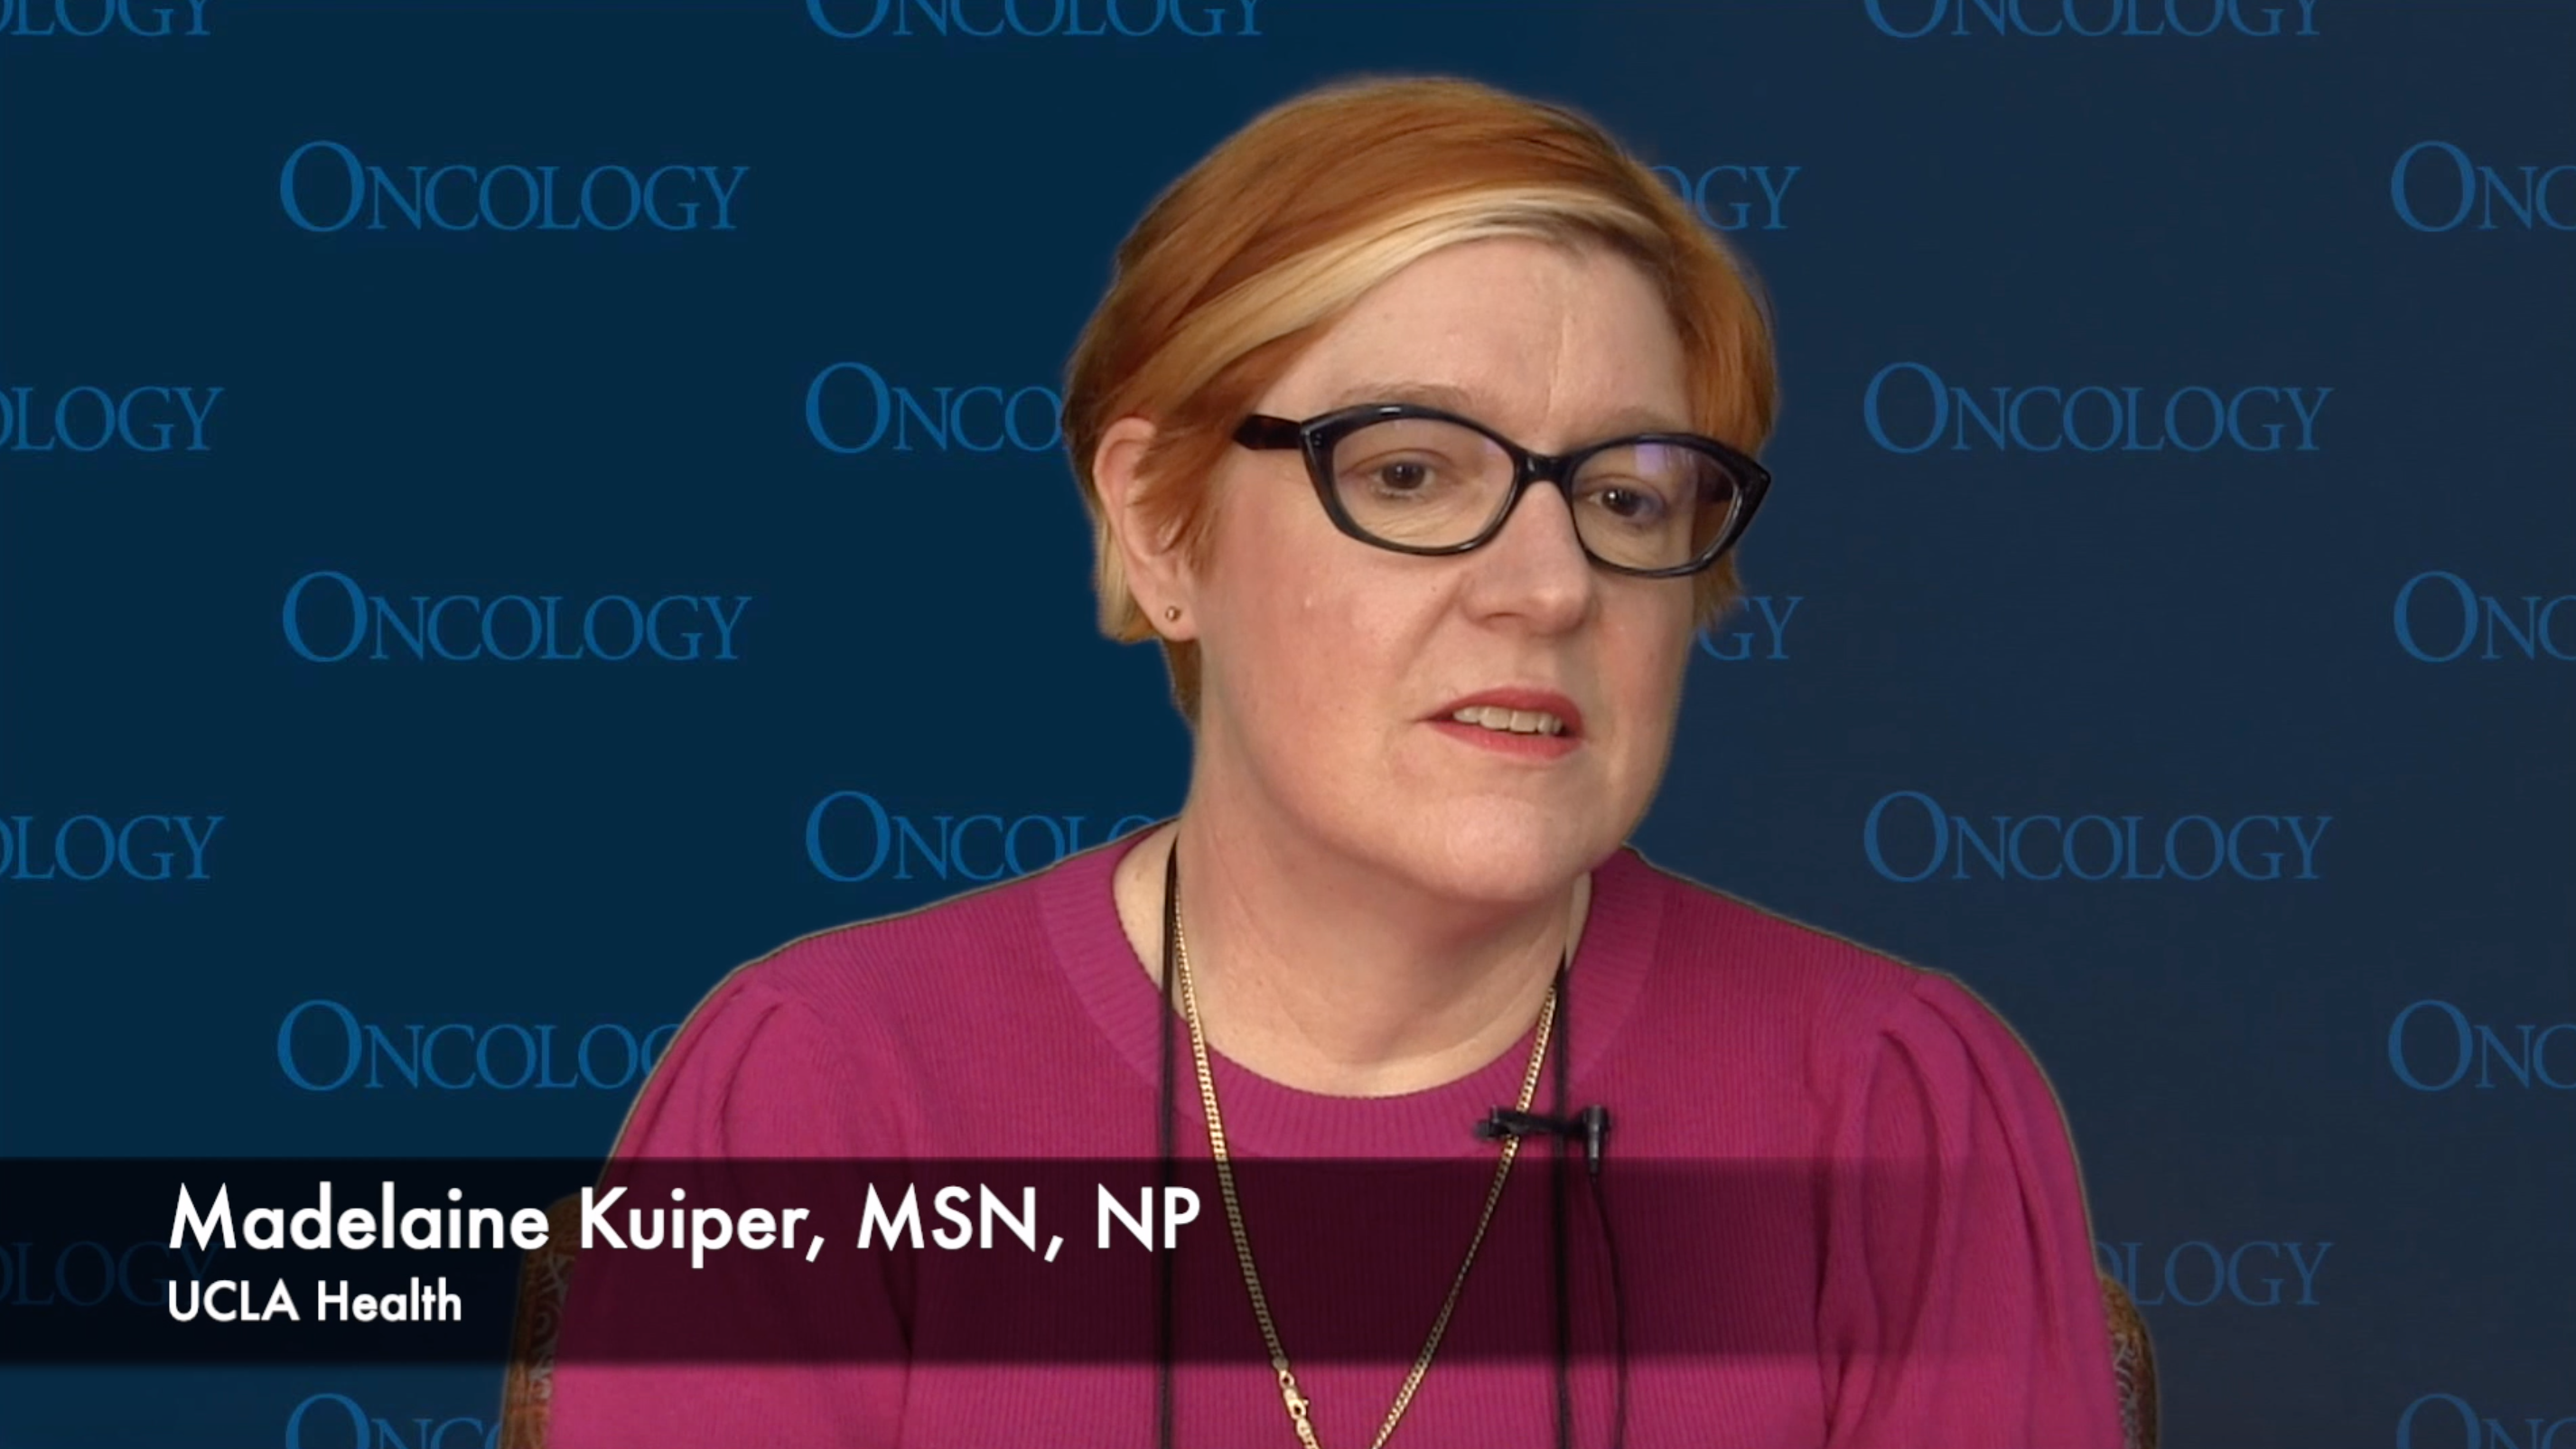 Madelaine Kuiper, MSN, NP, Discusses Rapid Development of HER2-Targeted Therapies